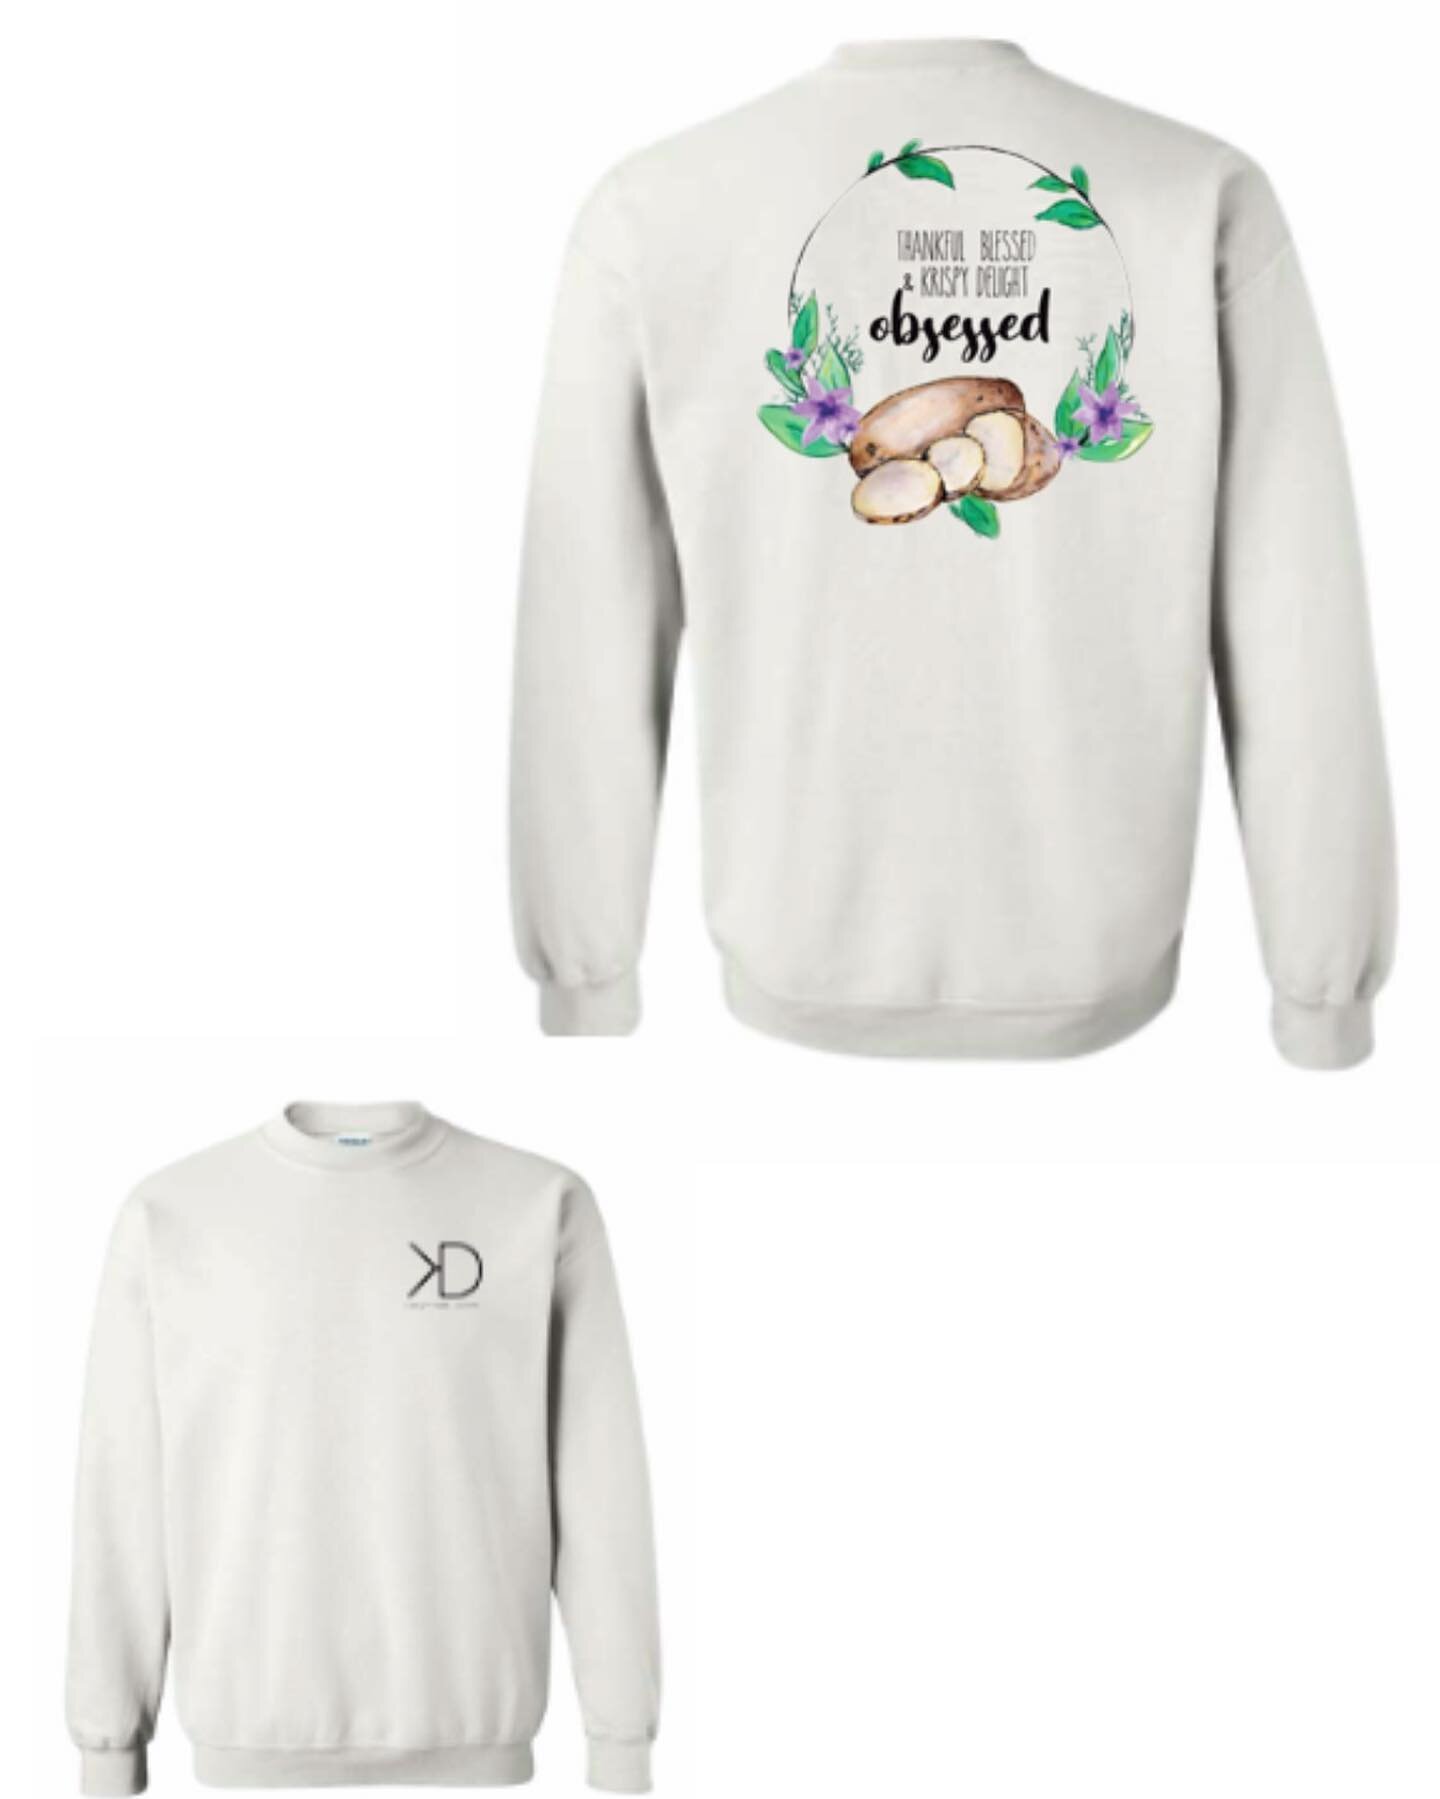 Who wants one of these sweaters!?We are going to do a pre order for the &ldquo;krispy delight obsessed&rdquo; crew neck (as seen in the photos). They will be $55 dollars. Please message us if you are interested! 

#krispydelightapparel #kdobessed #cr